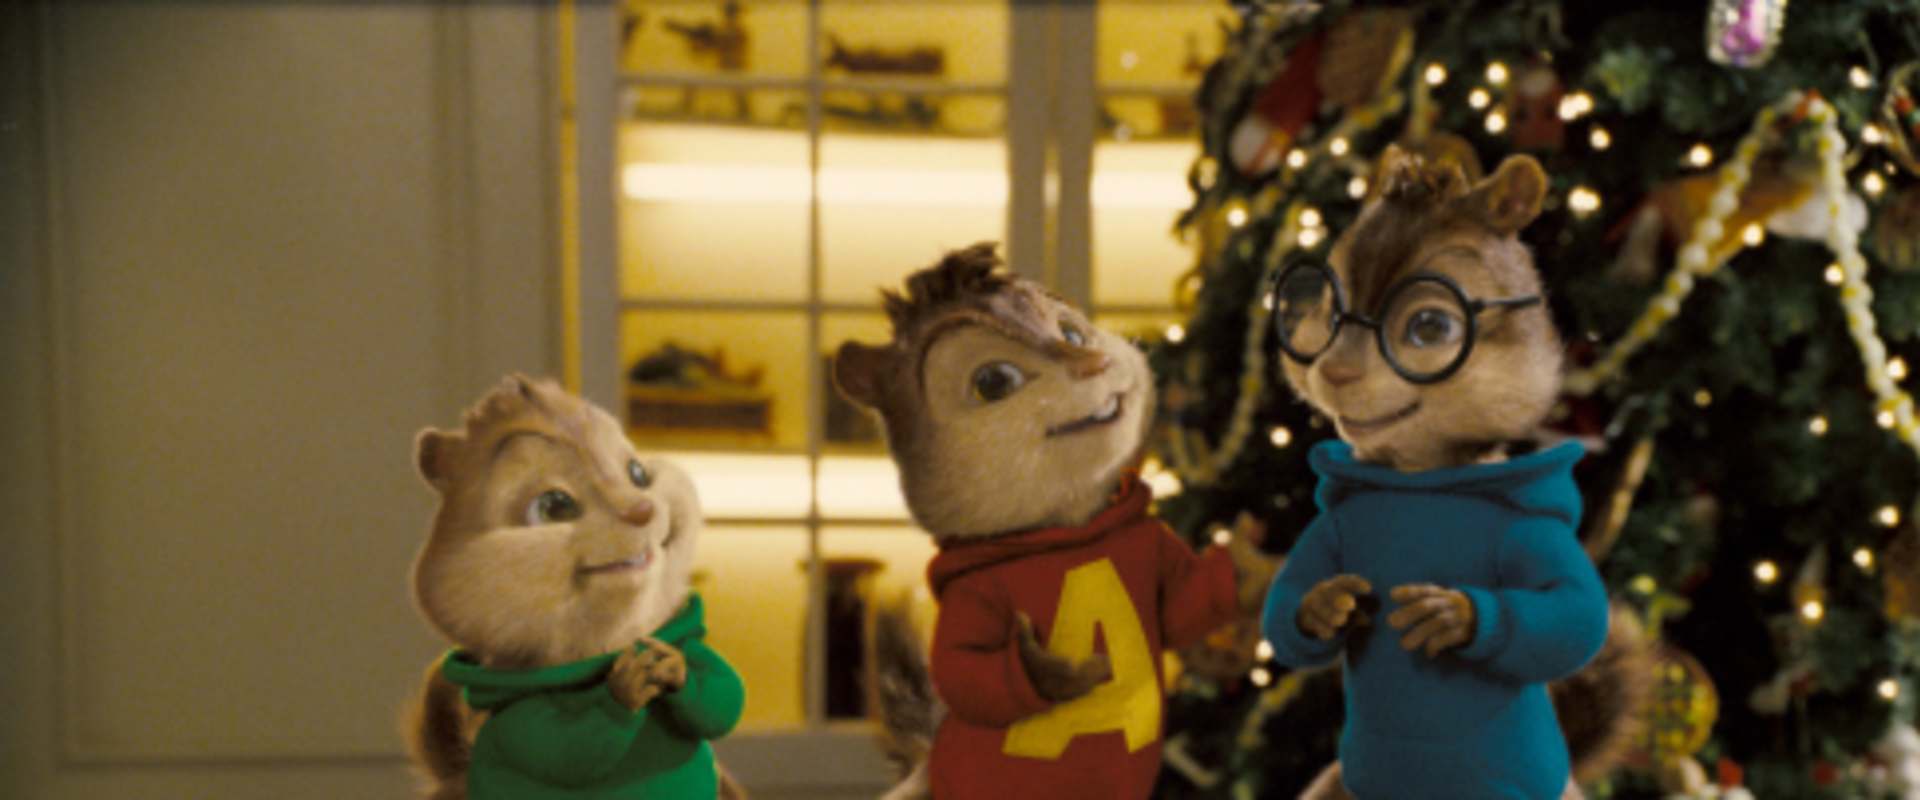 Alvin and the Chipmunks background 1